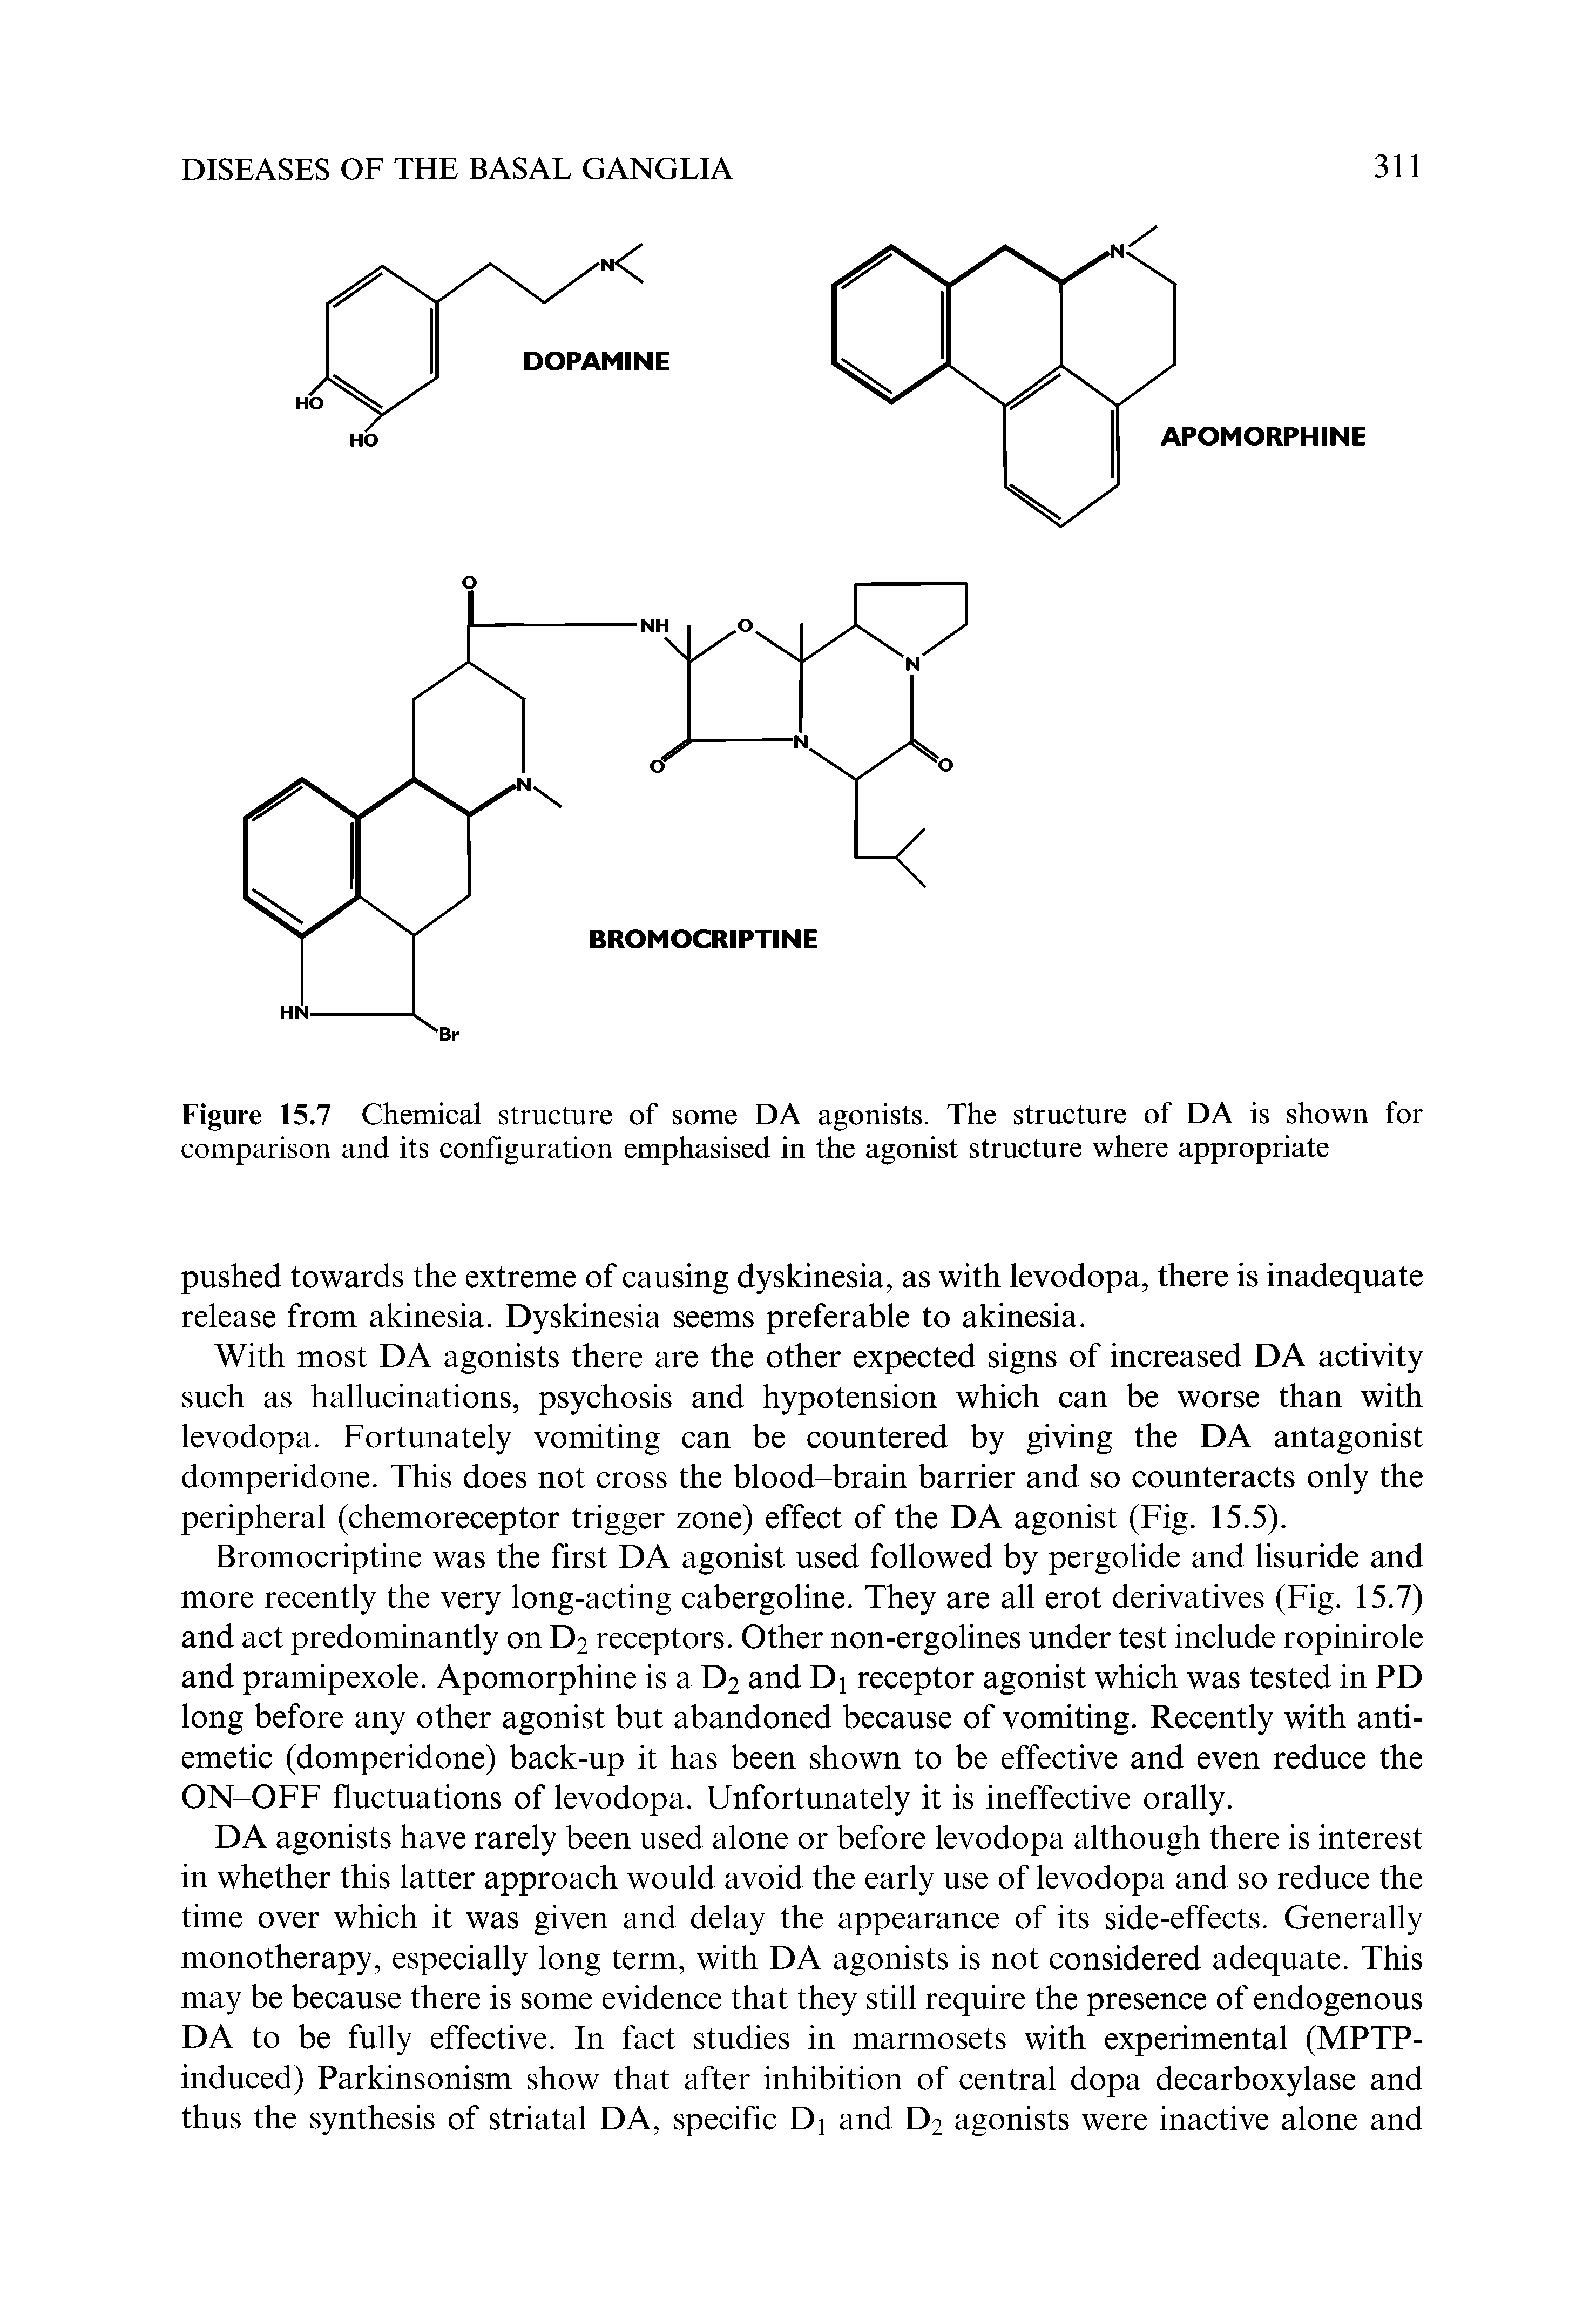 Figure 15.7 Chemical structure of some DA agonists. The structure of DA is shown for comparison and its configuration emphasised in the agonist structure where appropriate...